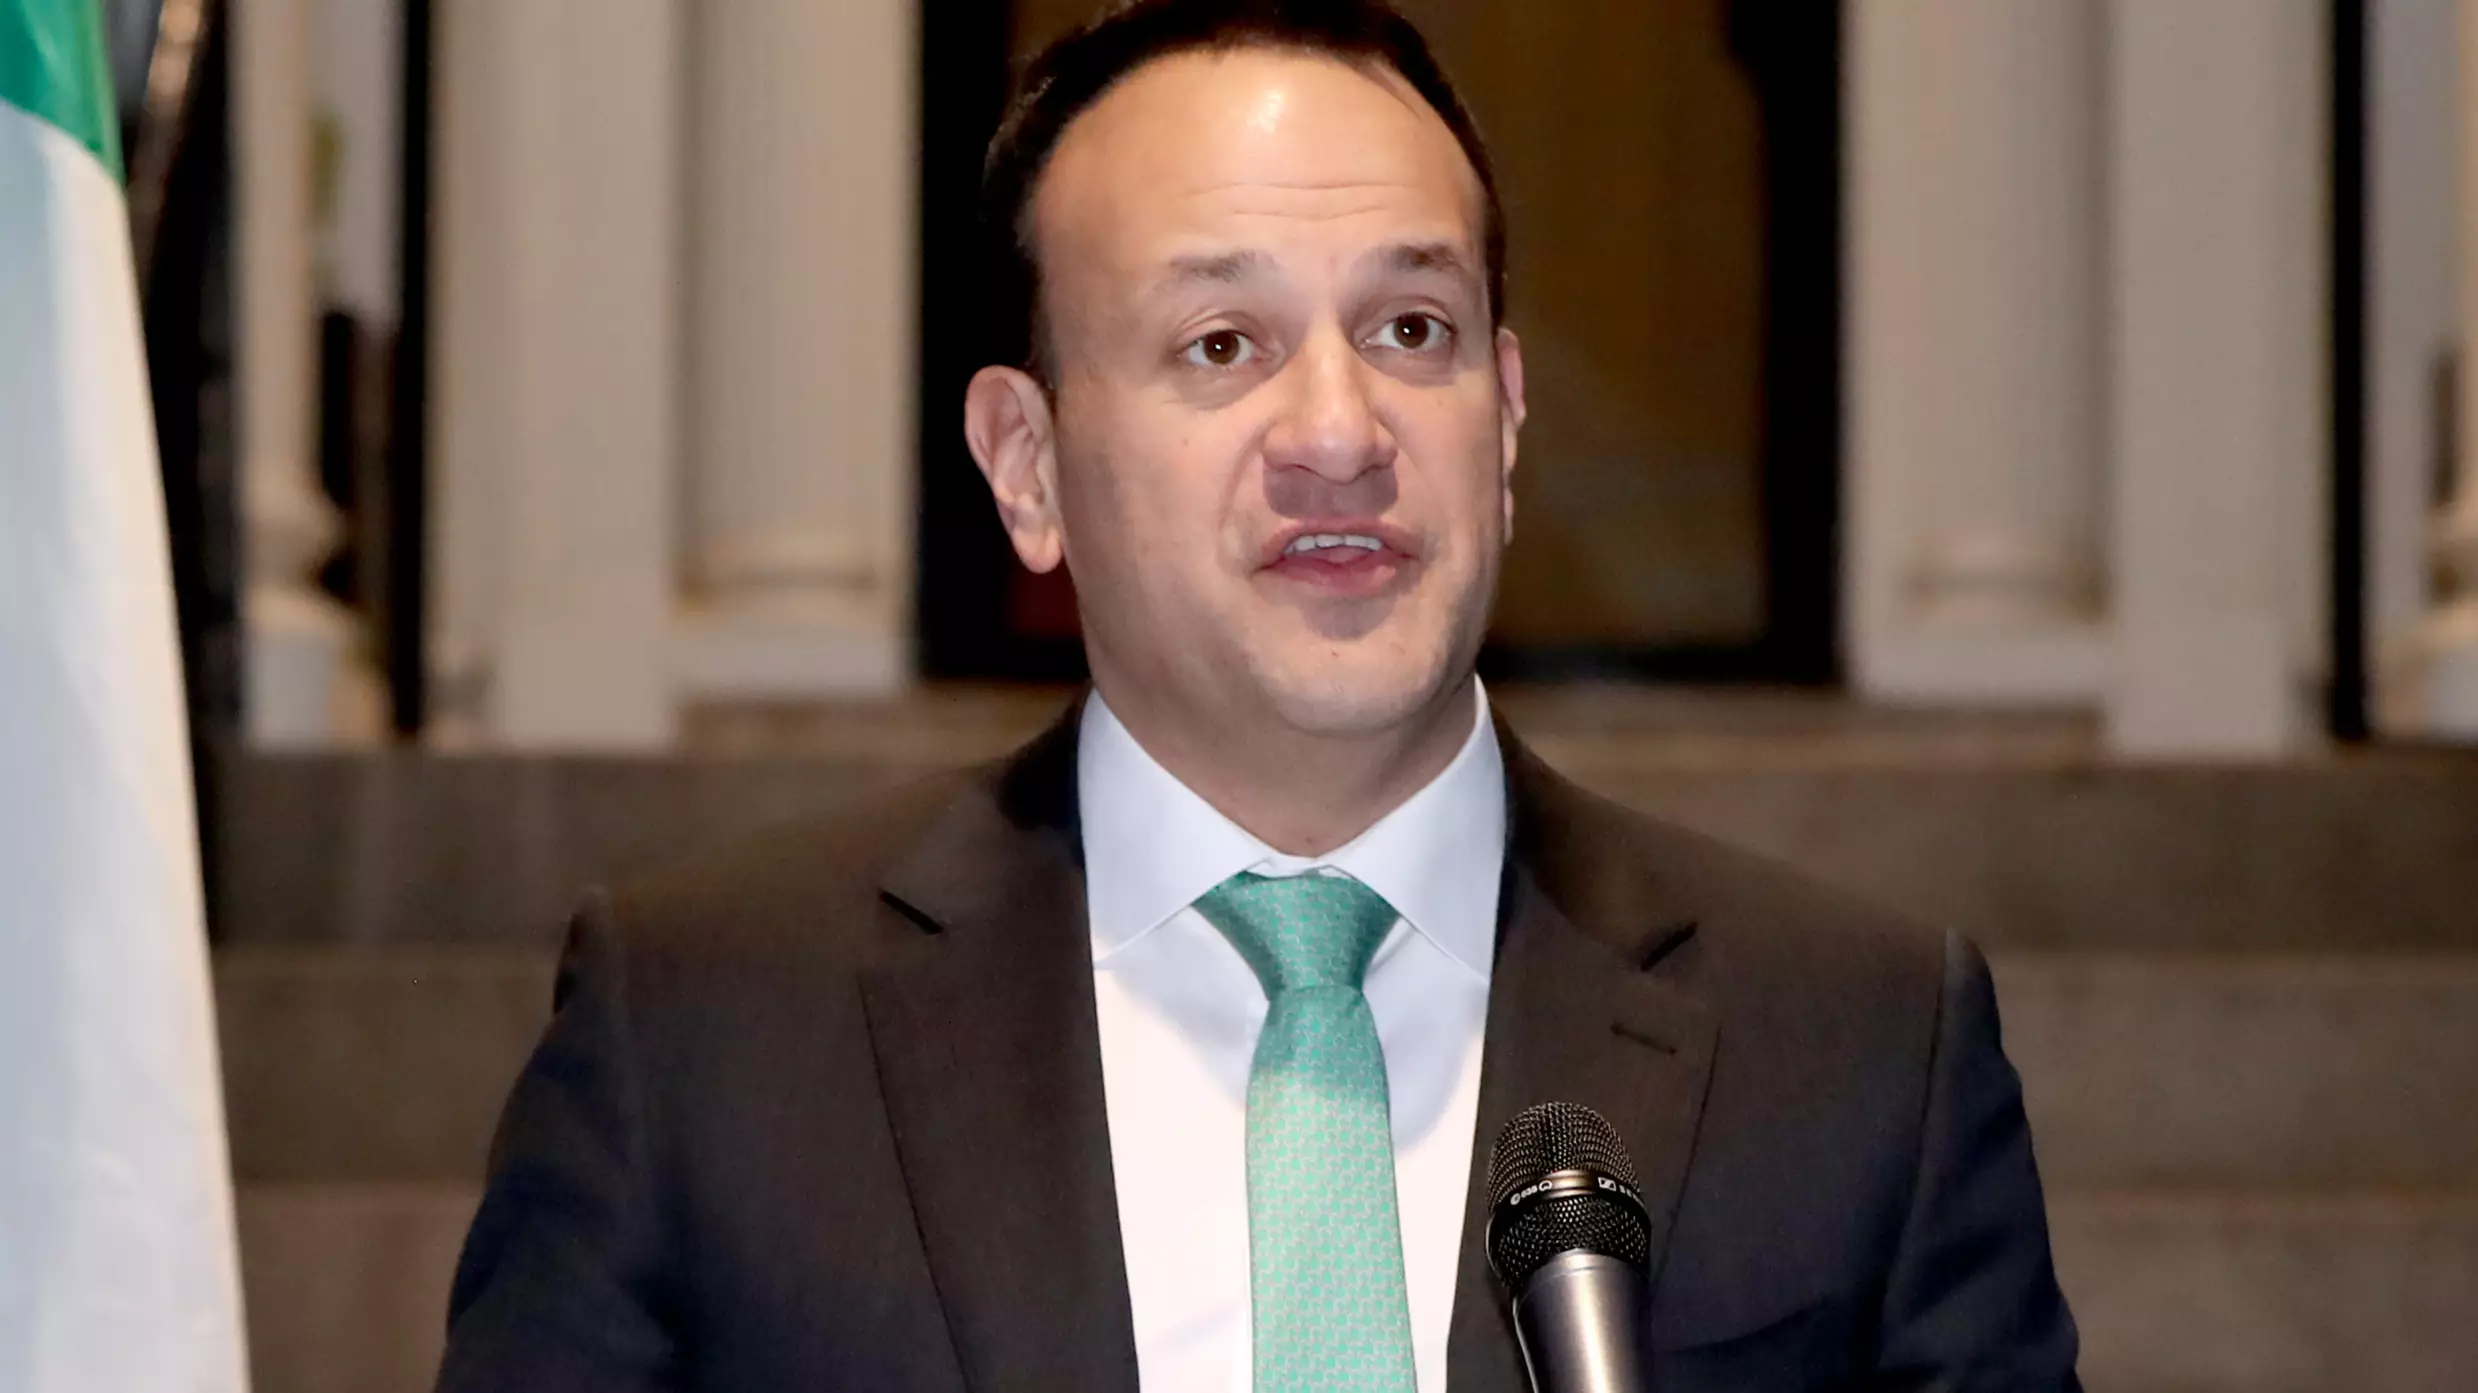 Leo Varadkar Says Further COVID-19 Restrictions Cannot Be Ruled Out